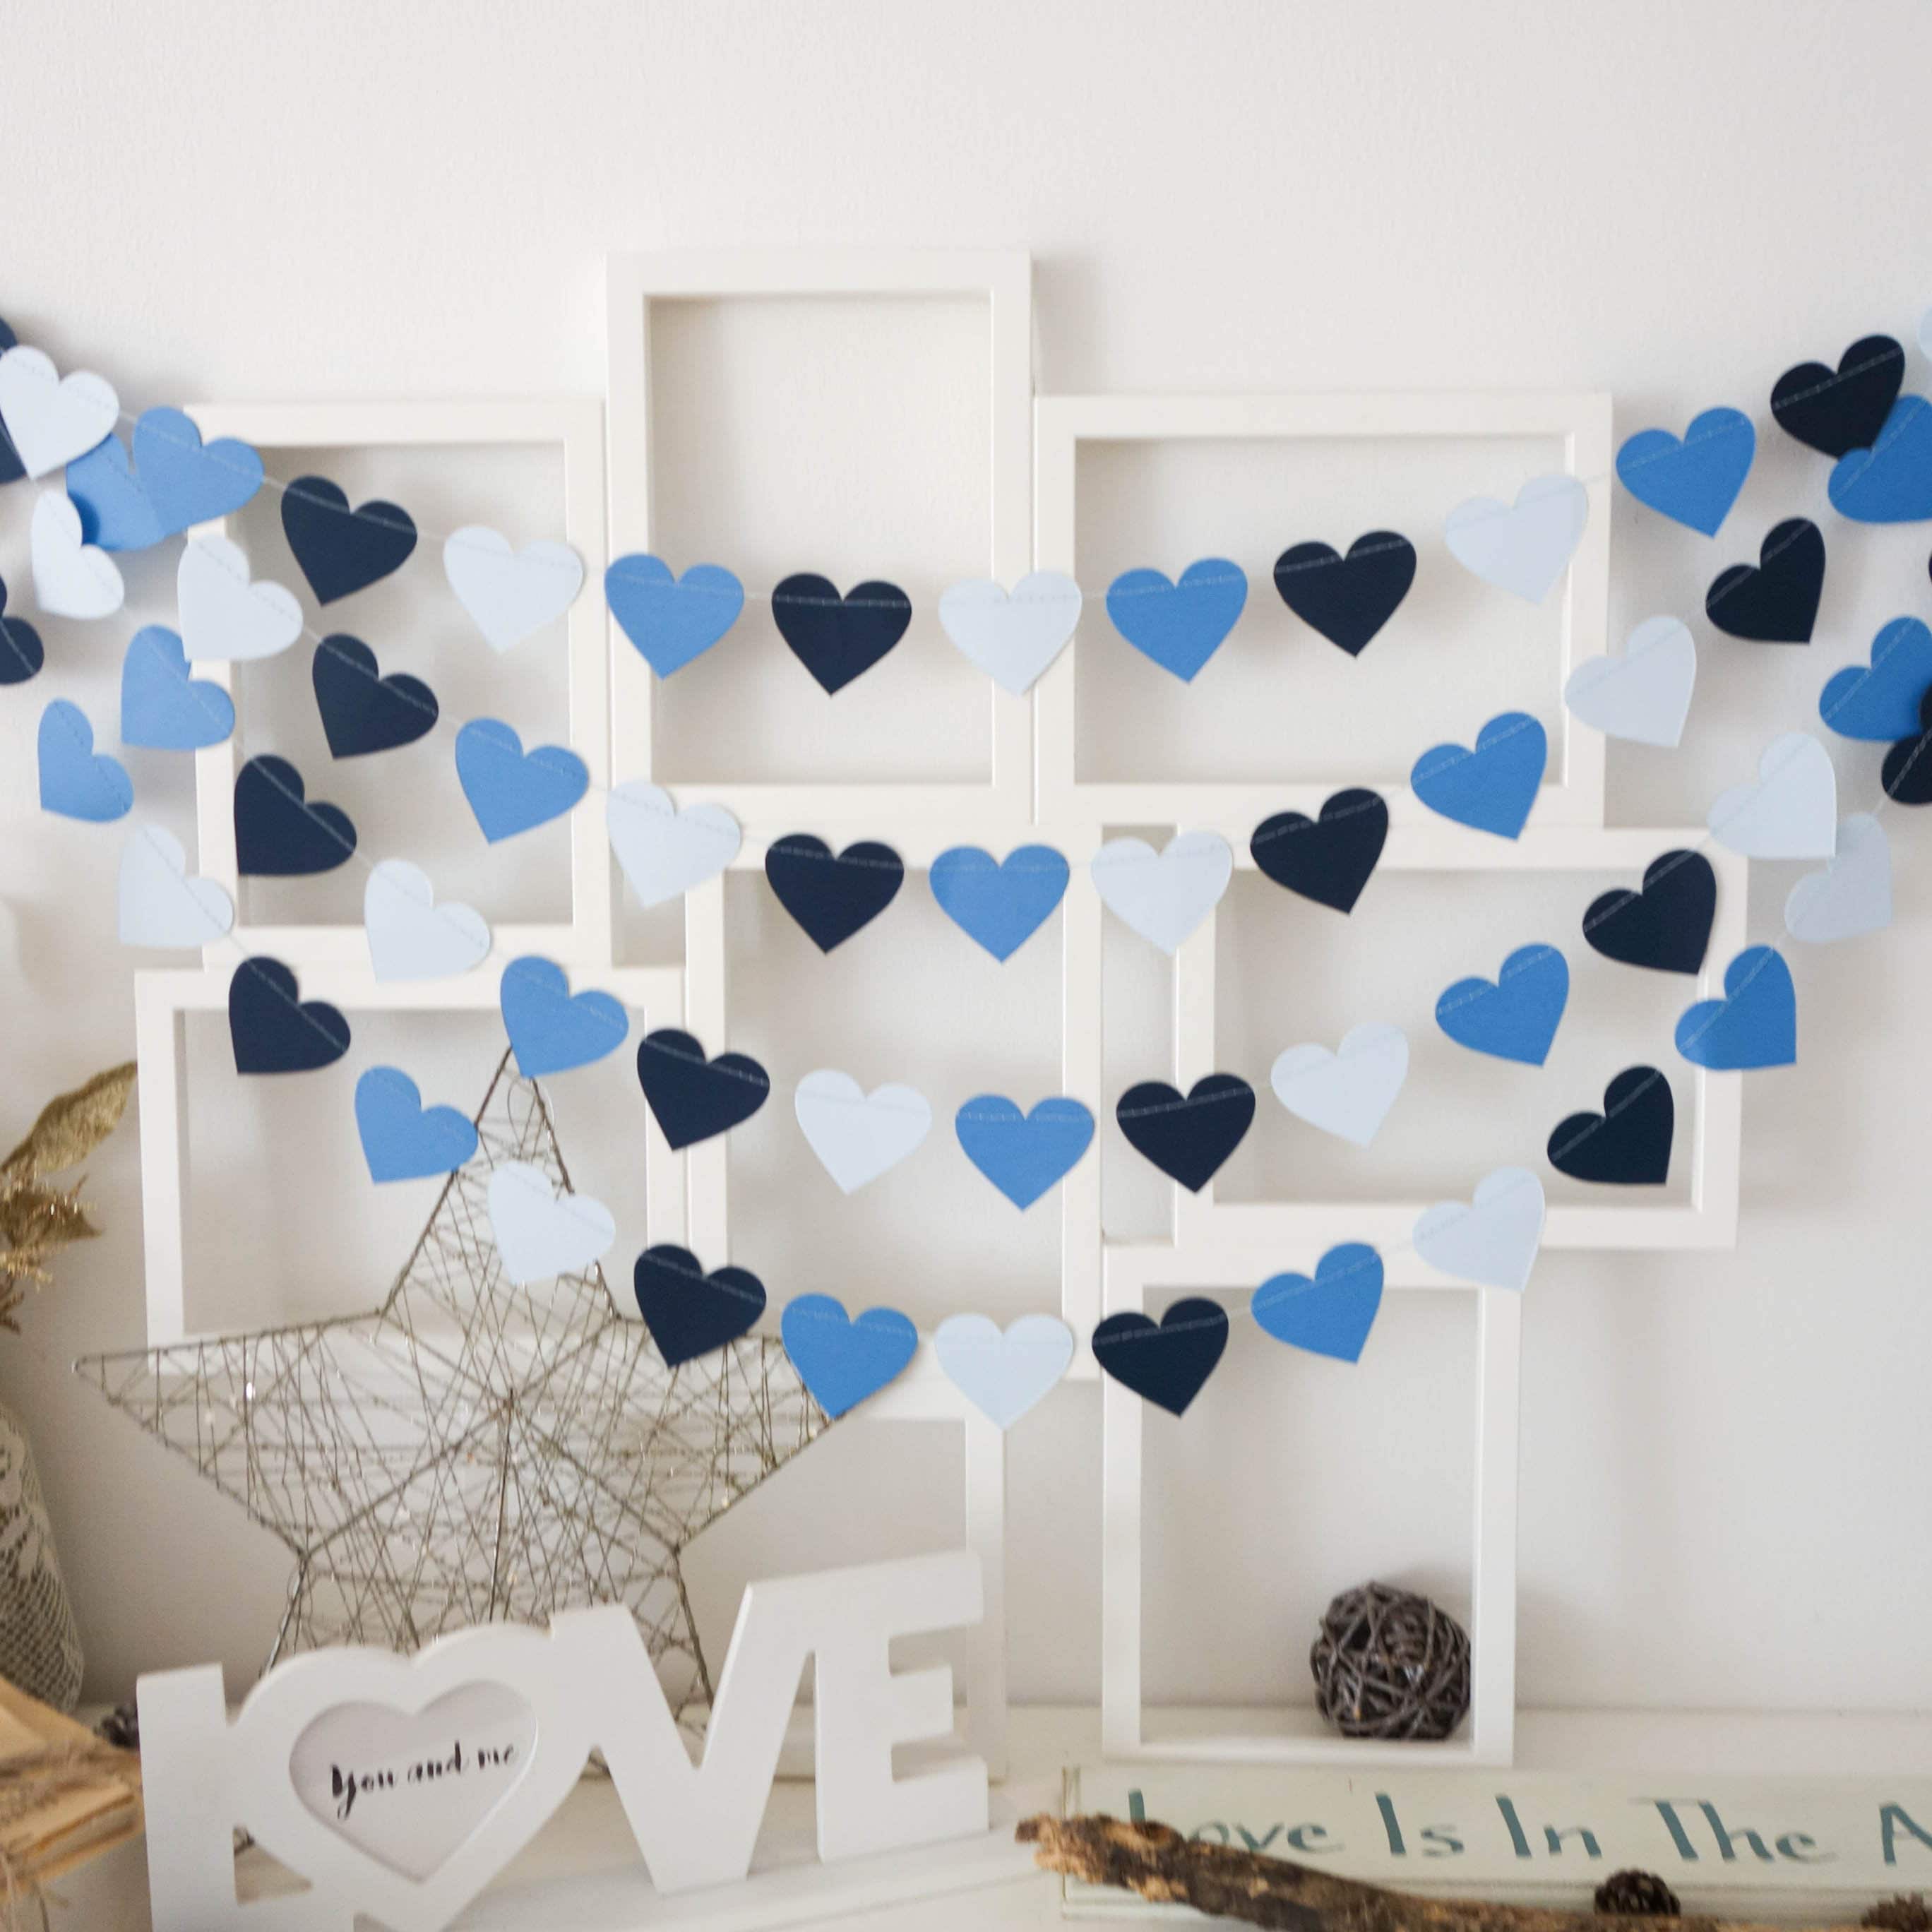 100 Small Paper Hearts, Die Cut Heart, Die Cut Paper Hearts, Heart Garland,  Small Hearts, Wedding Confetti, Pink Heart Shaped, Paper Garland -   Israel